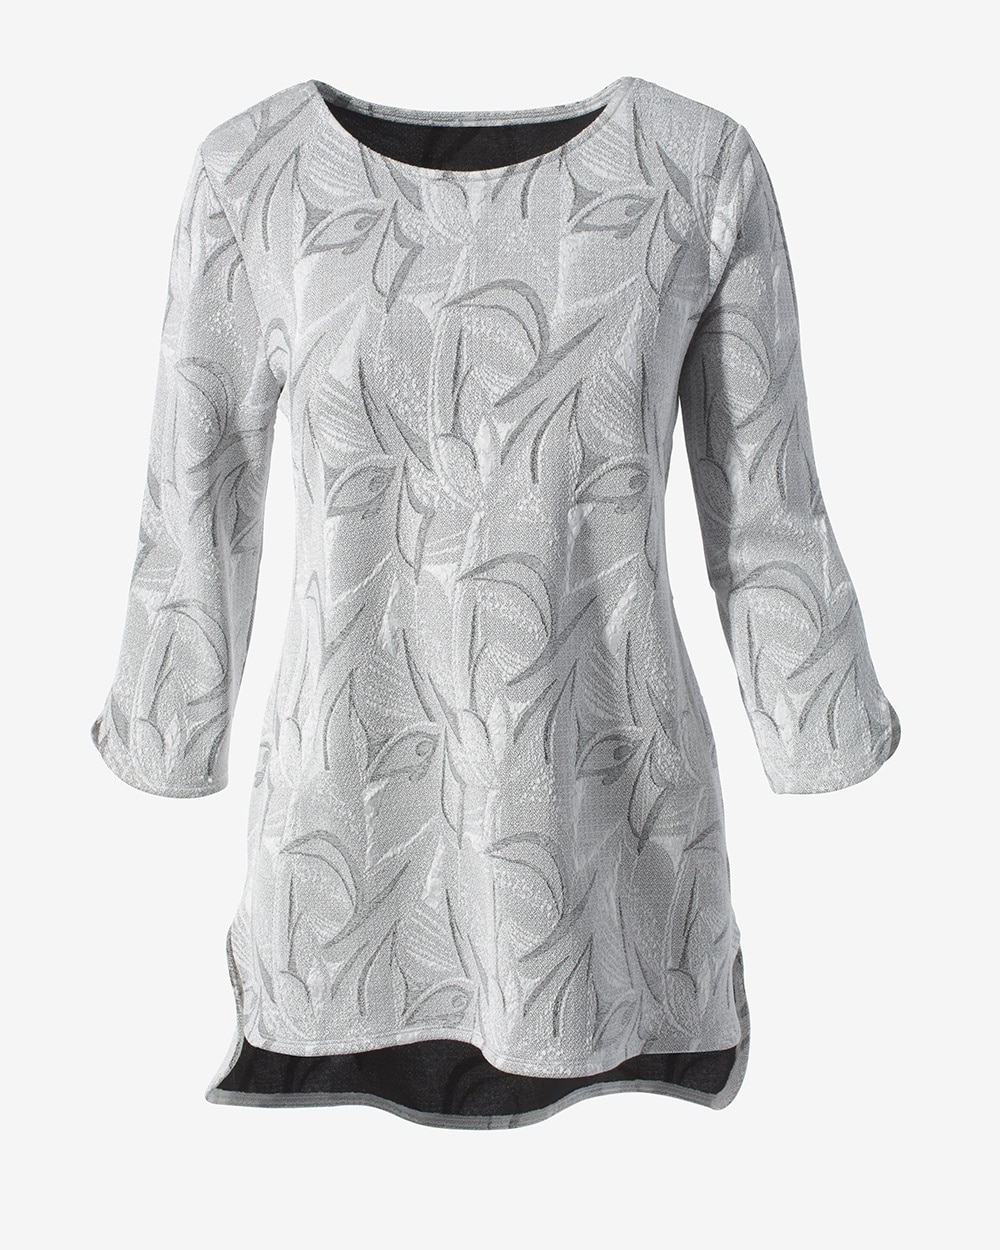 Easywear Abstract Jacquard Texture Tunic